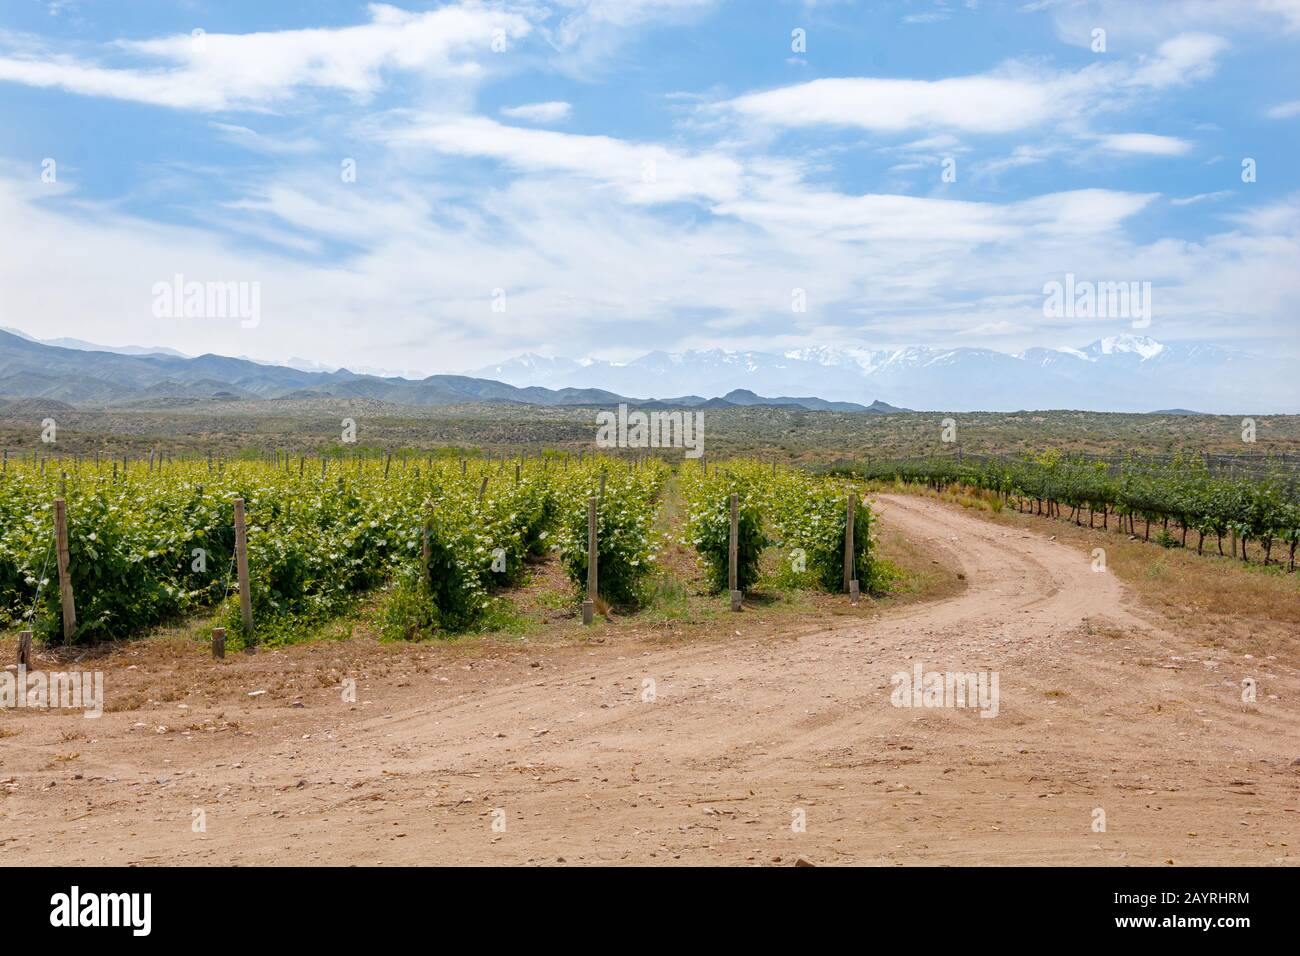 Picturesque rural scenery of vineyard with  snowy peaks mountains in the background. Spring season in Uco Valley, Mendoza, Argentina Stock Photo